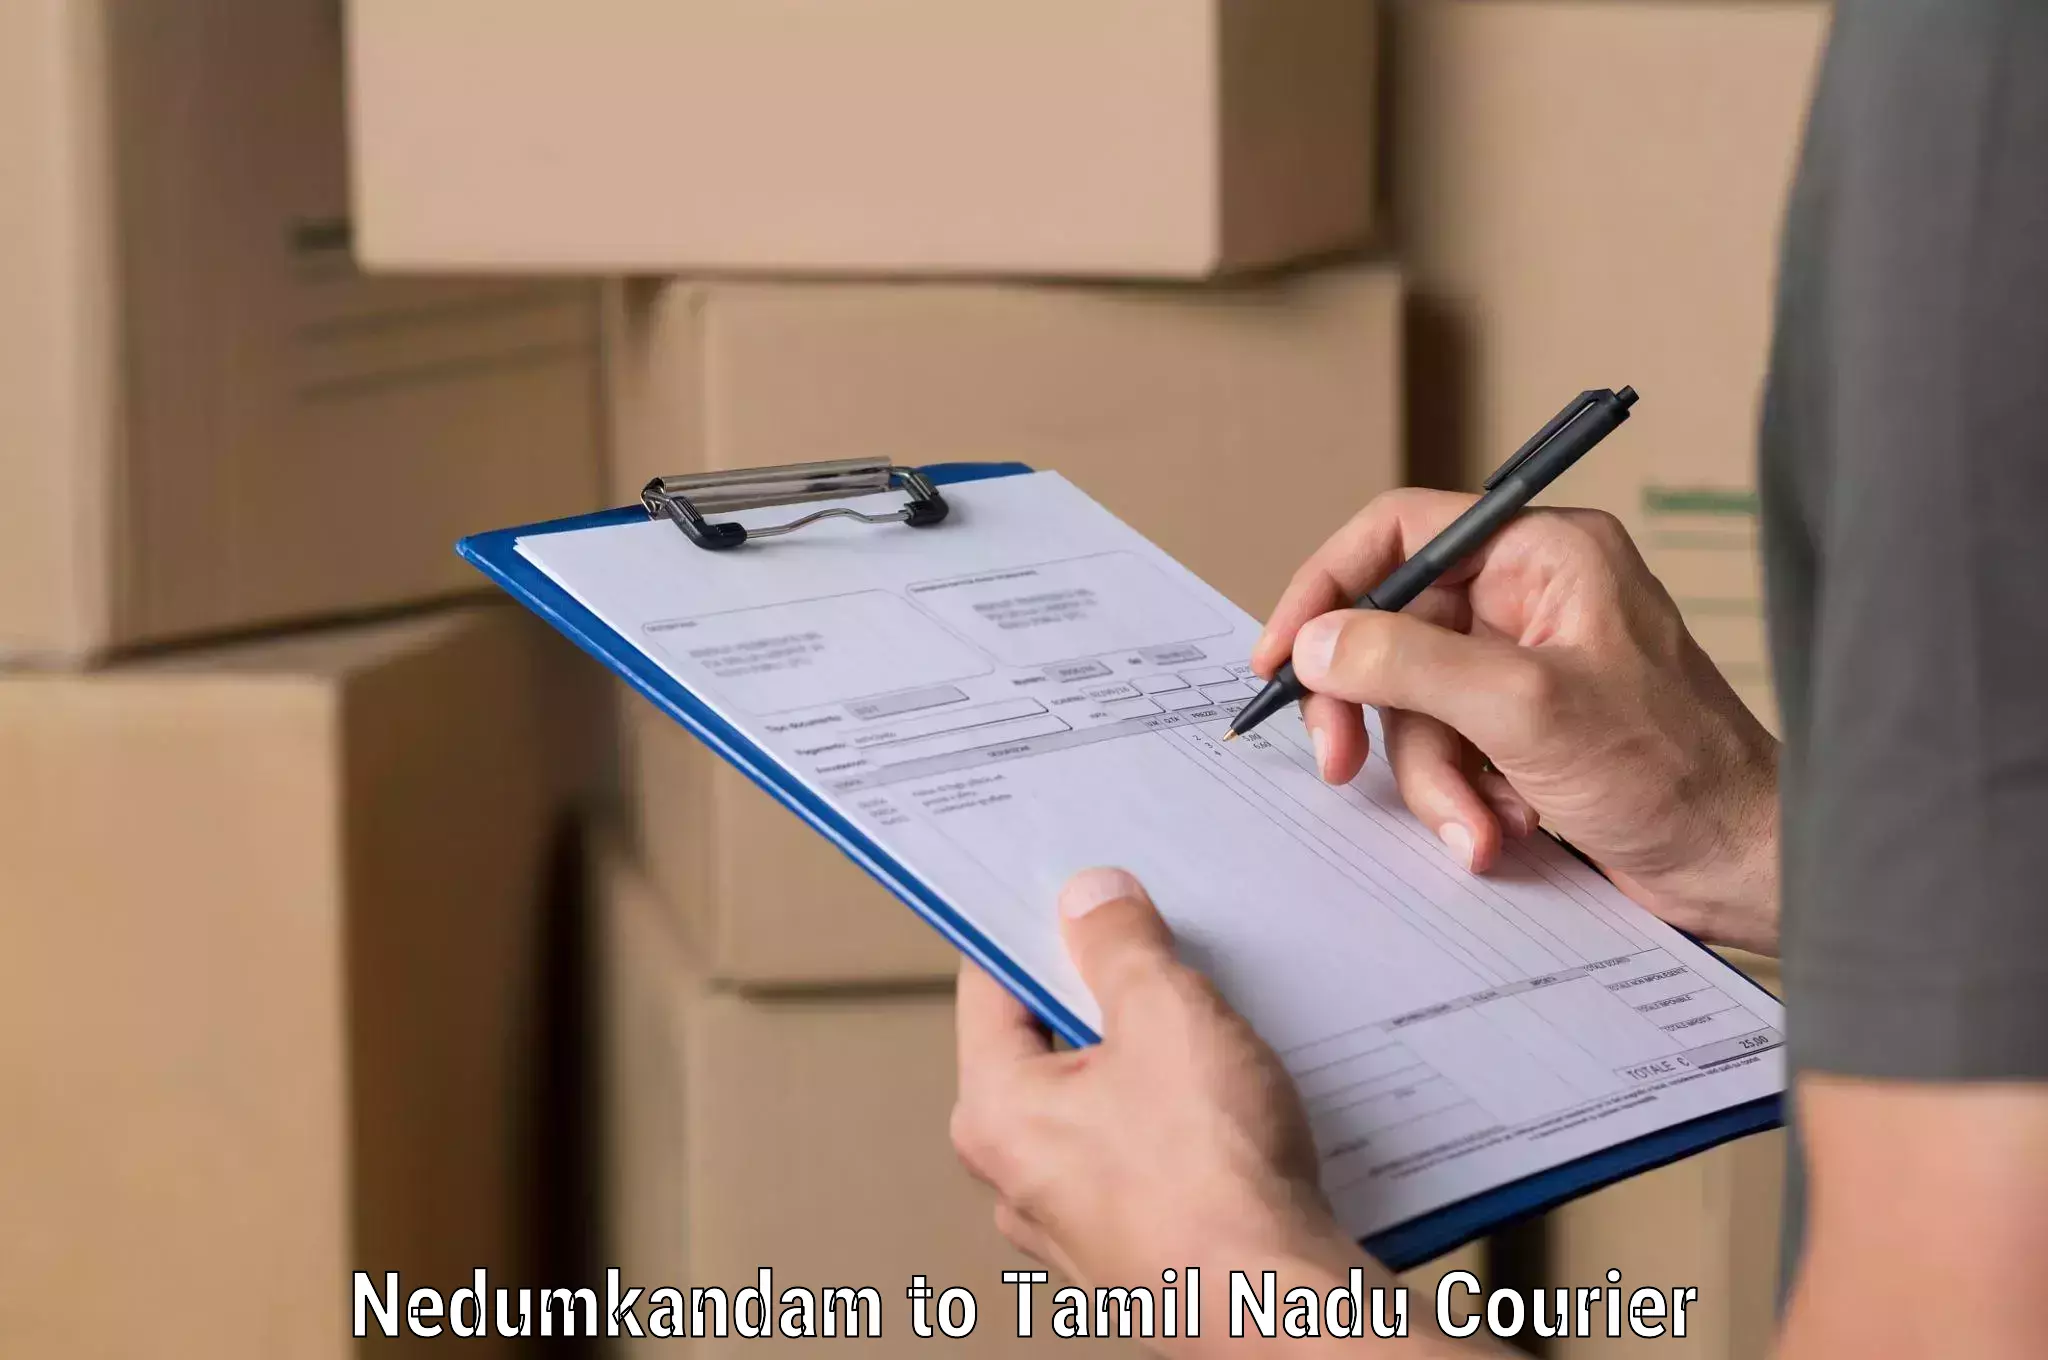 State-of-the-art courier technology Nedumkandam to Tamil Nadu